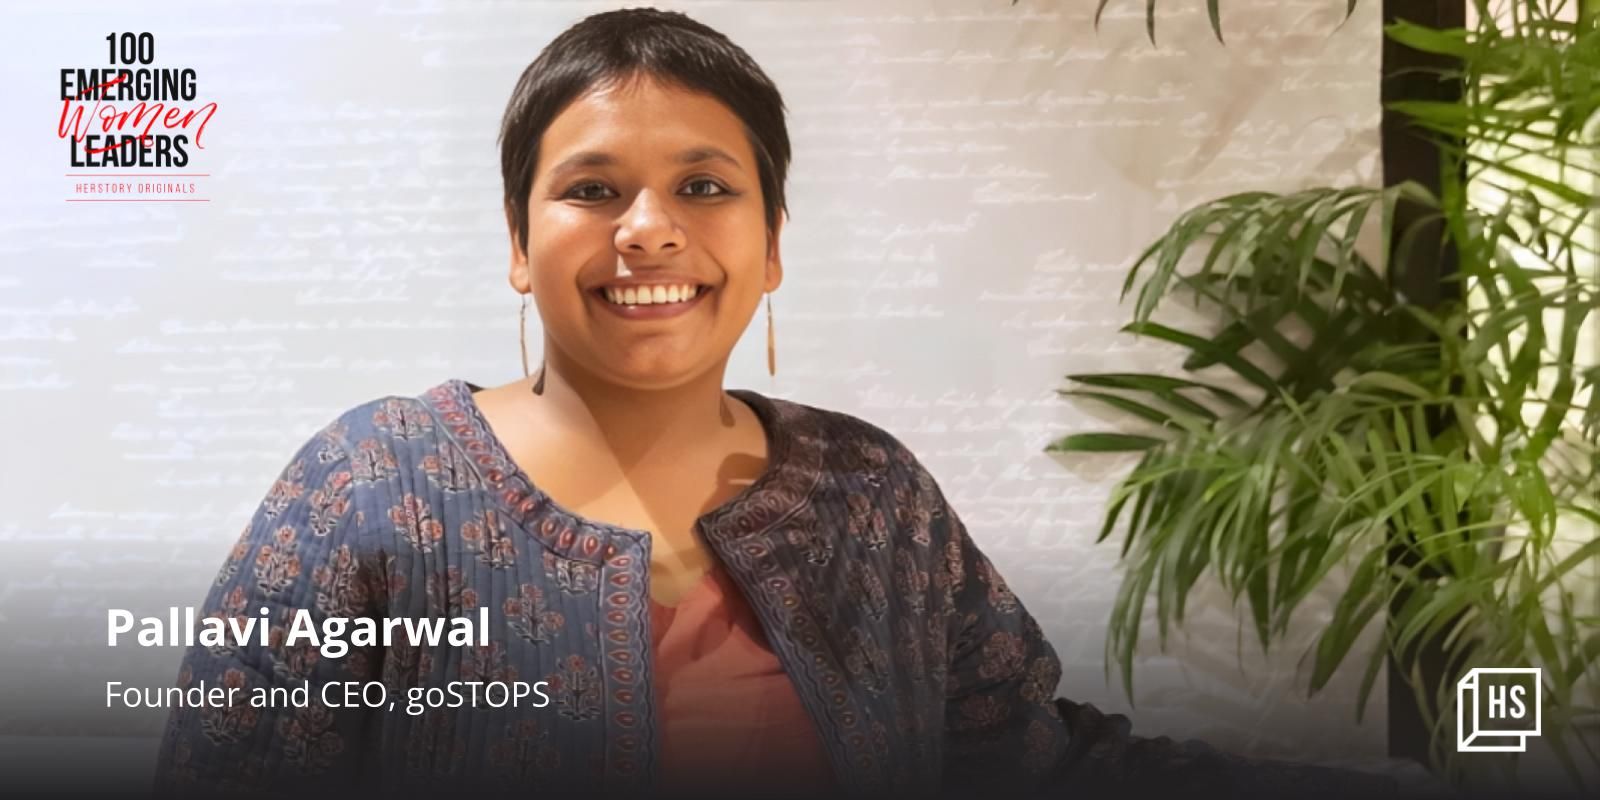 [100 Emerging Women Leader] Pallavi Agarwal on what led her to start a youth hostel company 
